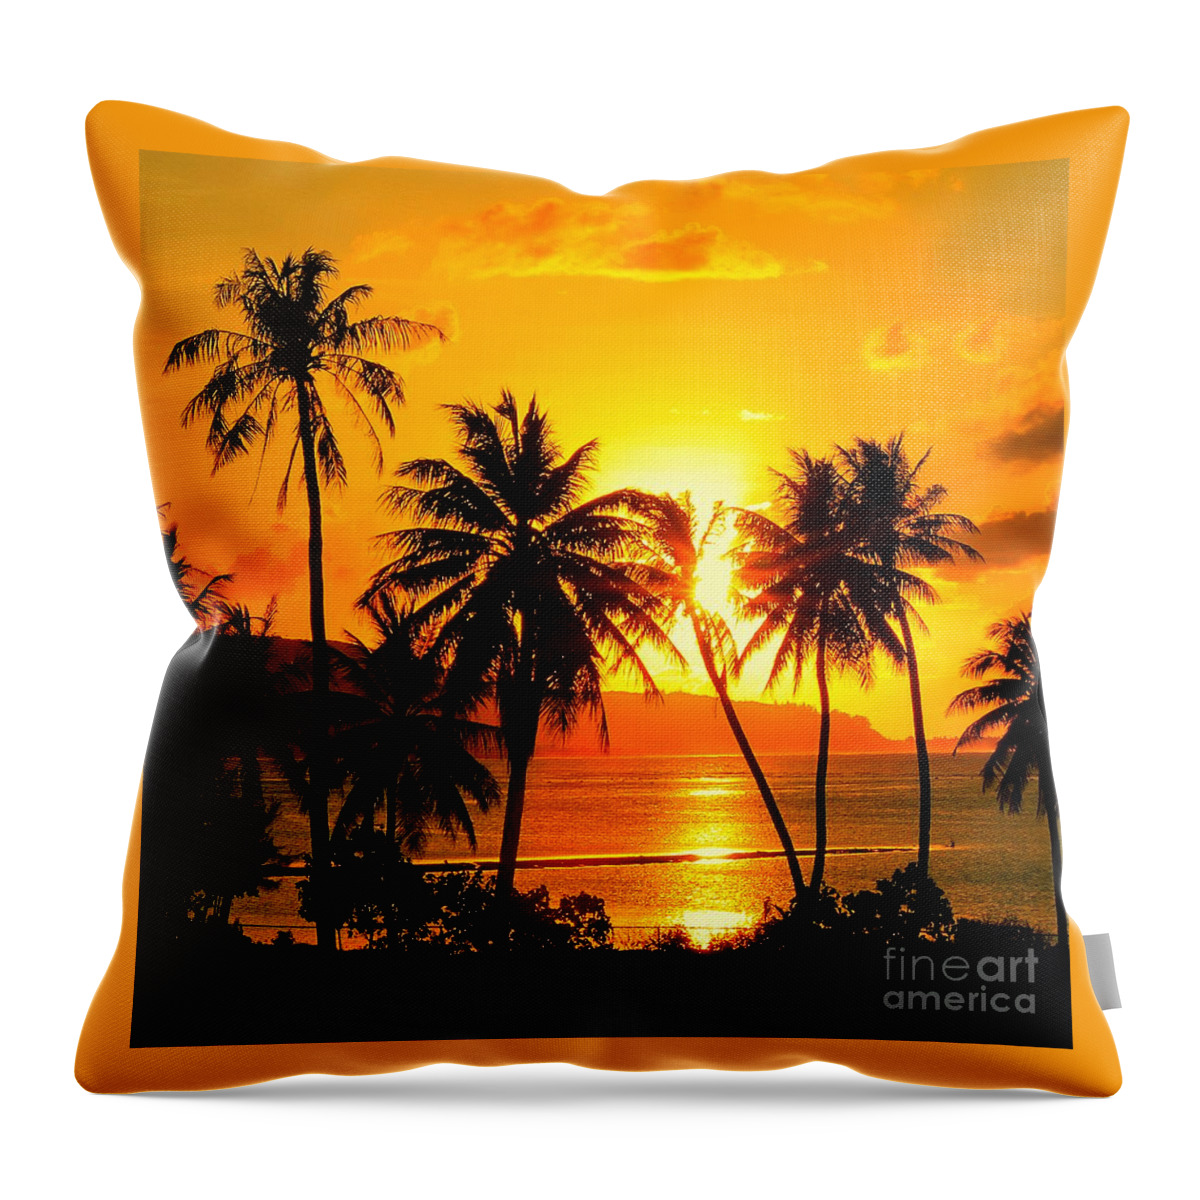  Tropical Beach Throw Pillow featuring the photograph Tropical Sunset by Scott Cameron